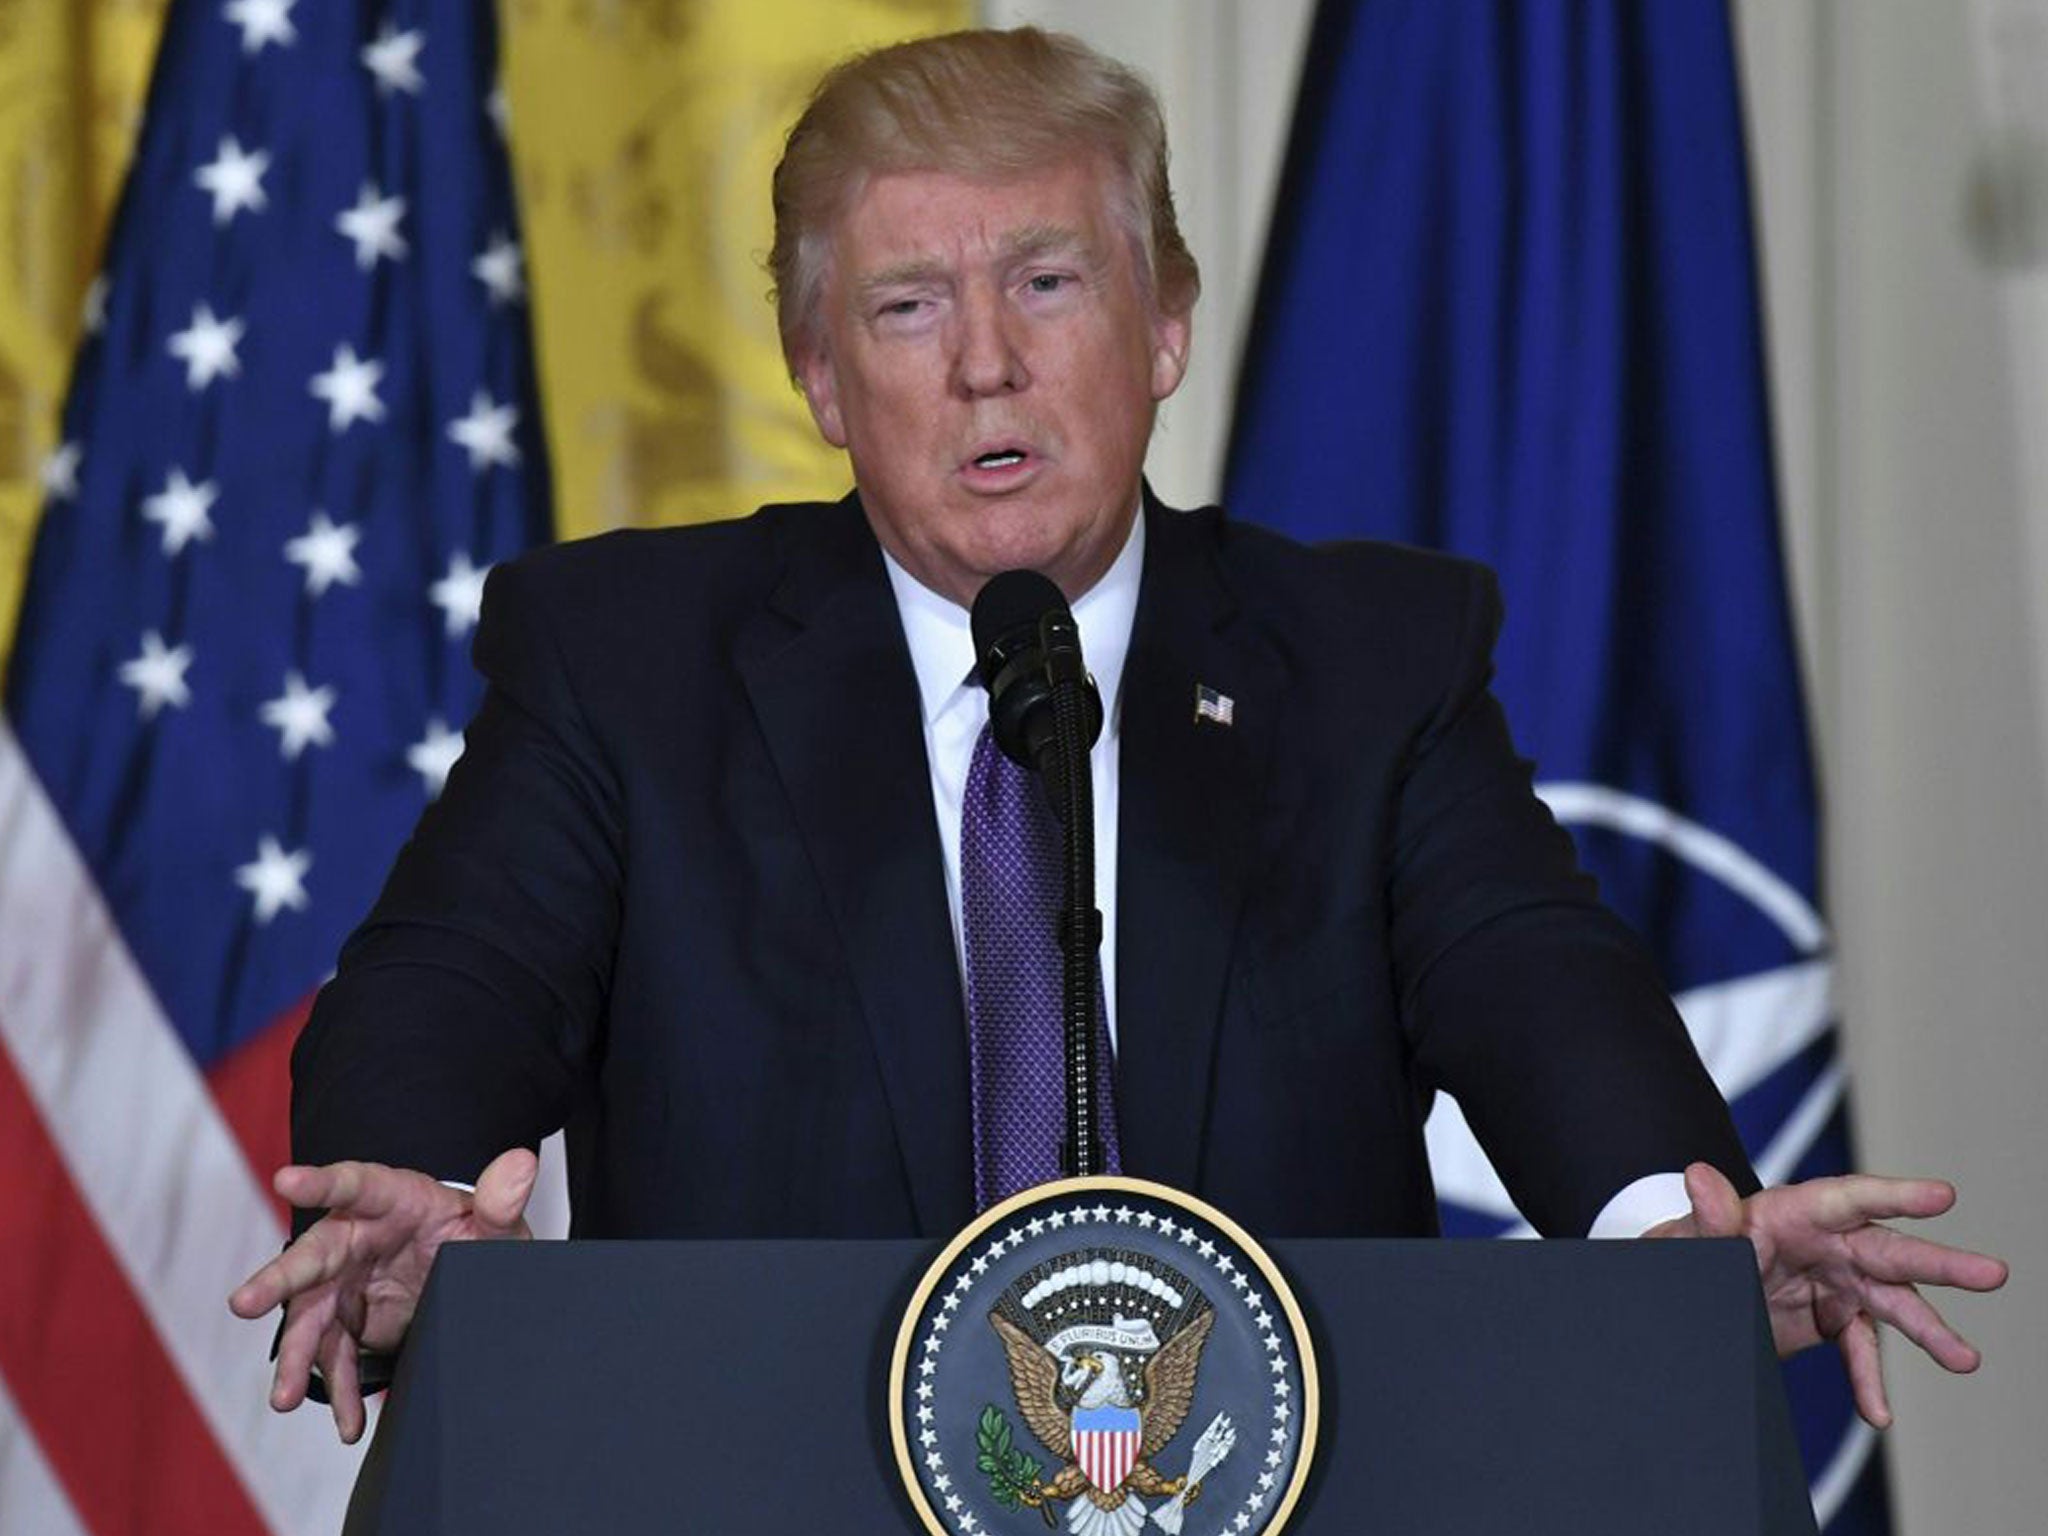 President Donald Trump speaks during a joint press conference with NATO Secretary General Jens Stoltenberg